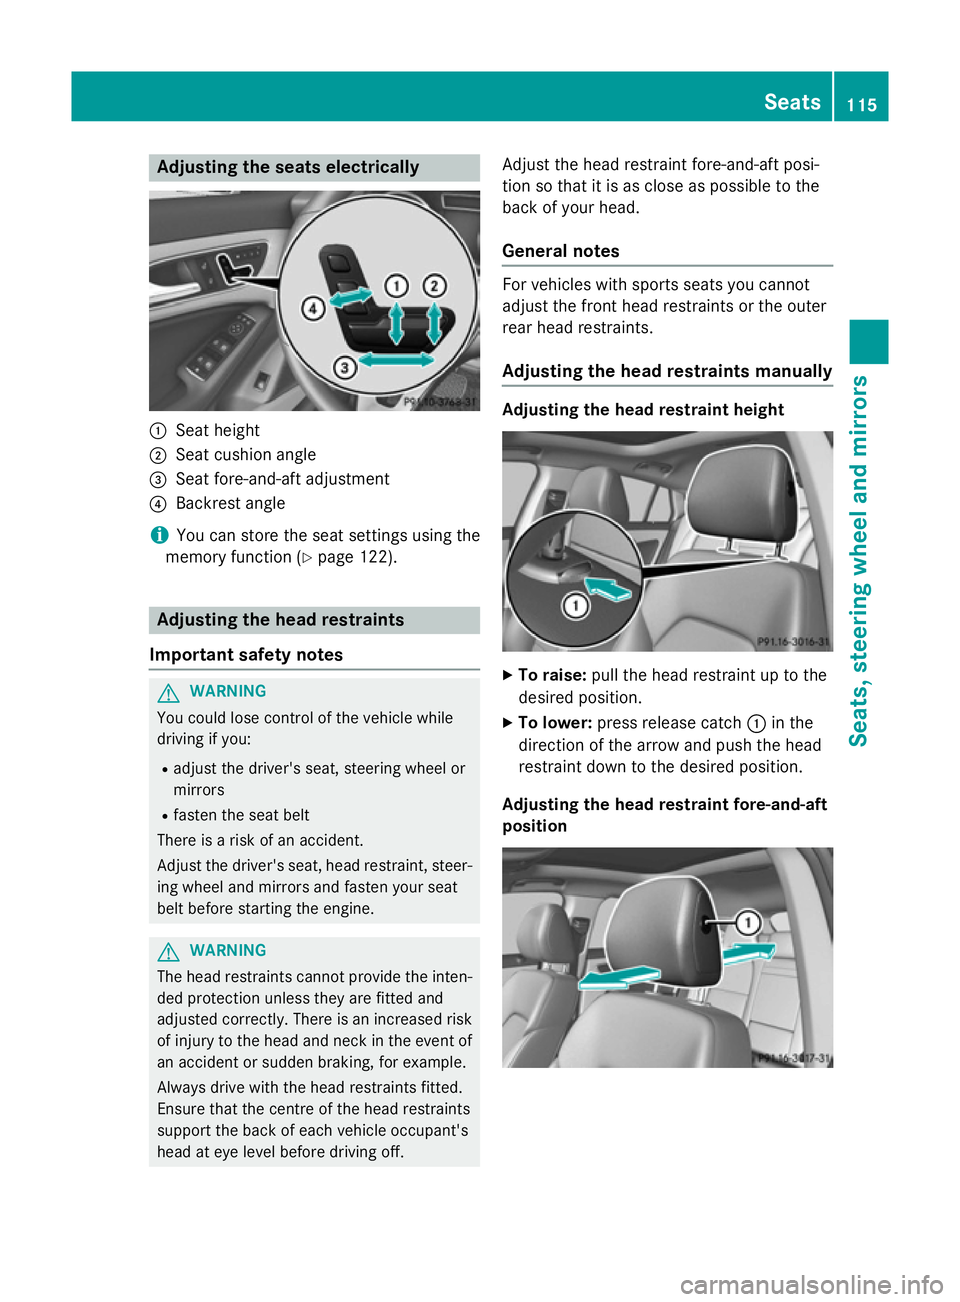 MERCEDES-BENZ CLA SHOOTING BRAKE 2015  Owners Manual Adjusting the seats electrically
:
Seat height
; Seat cushion angle
= Seat fore-and-aft adjustment
? Backrest angle
i You can store the seat settings using the
memory function (Y page 122). Adjusting 